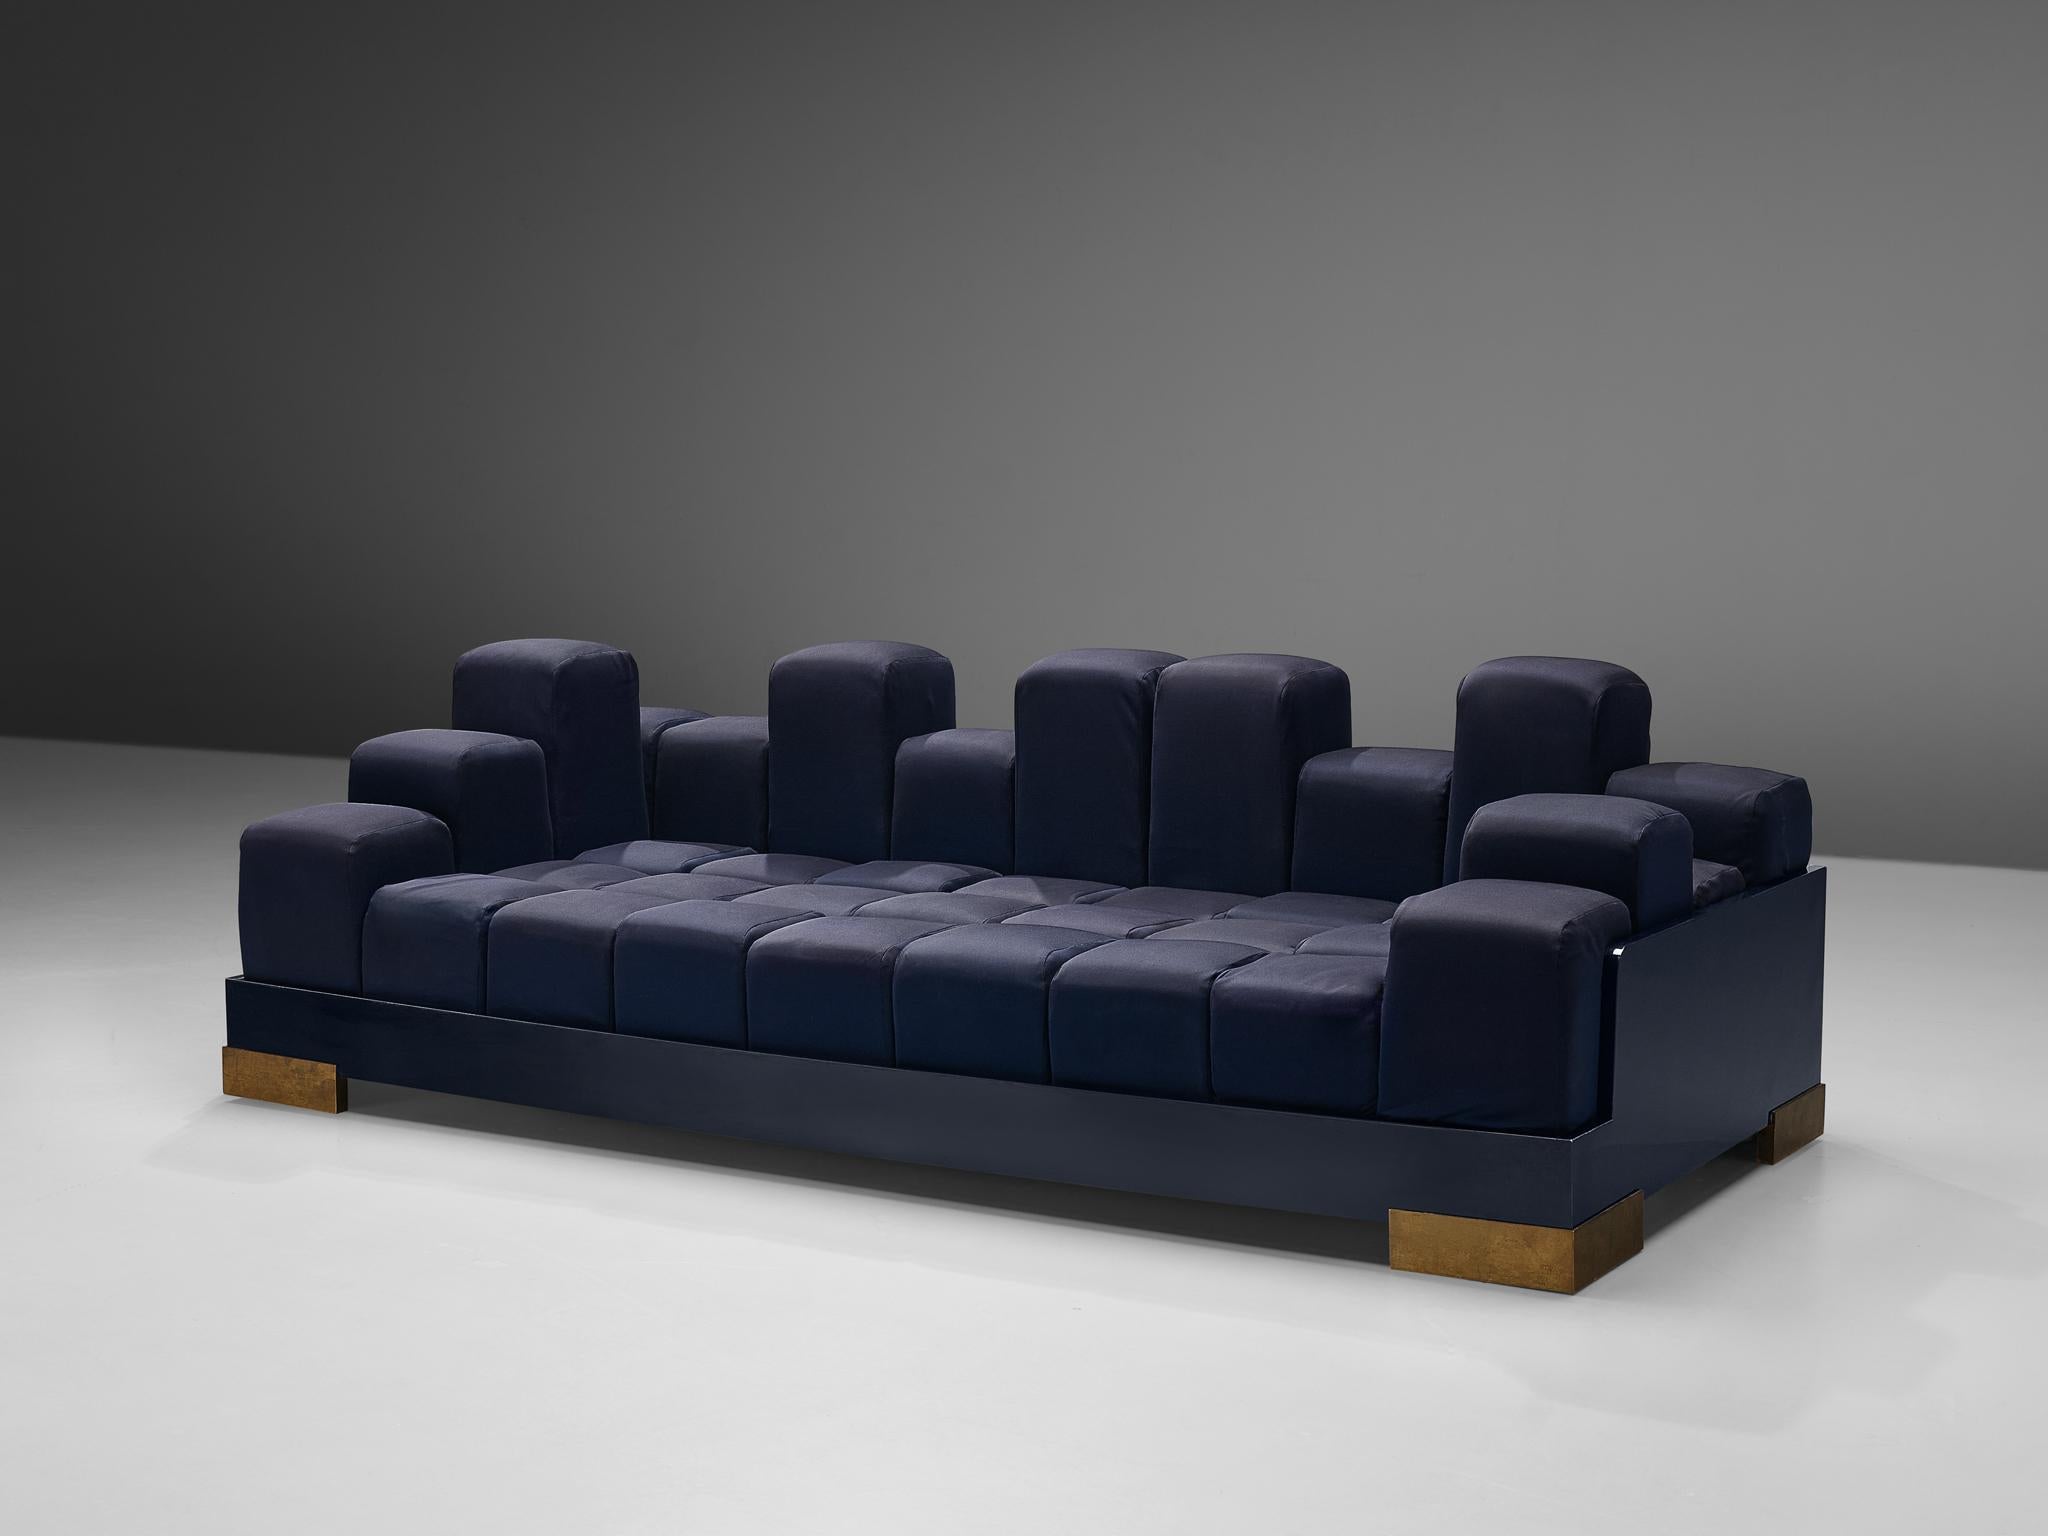 Italian 'Manhattan Skyline' sofa, blue upholstery, lacquered wood, brass, Italy, 1980s

Rare Italian sofa consisting of multiple cubes in a wooden frame. Both the seat and the surrounding frame are built of multiple cubes. A playful detail is the